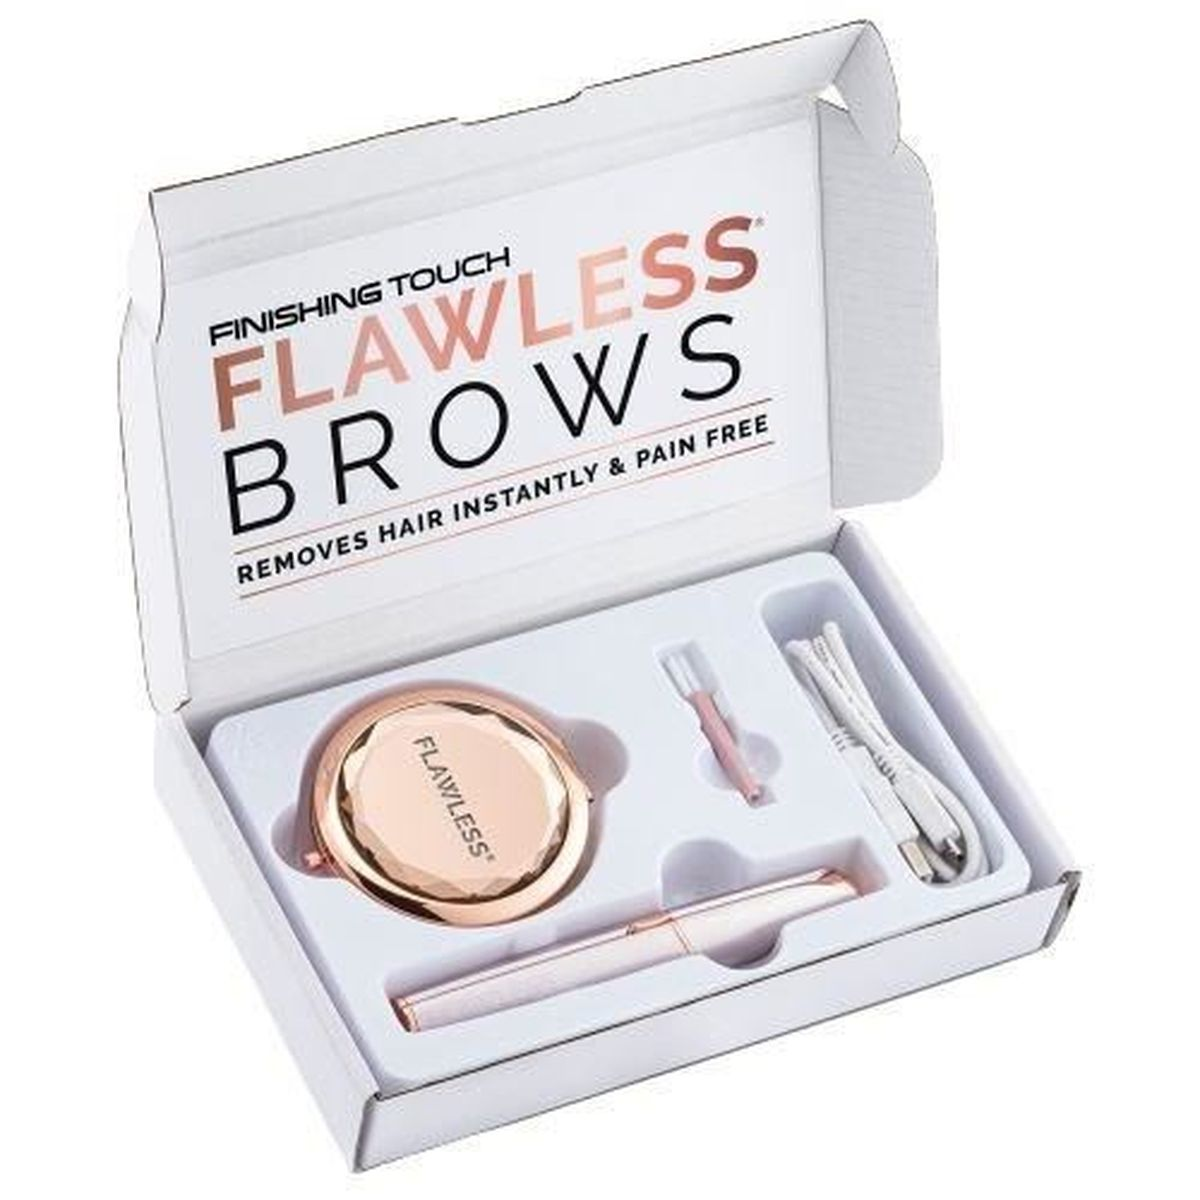 FLAWLESS Finishing Touch Flawless Epilierer, Face Roségold